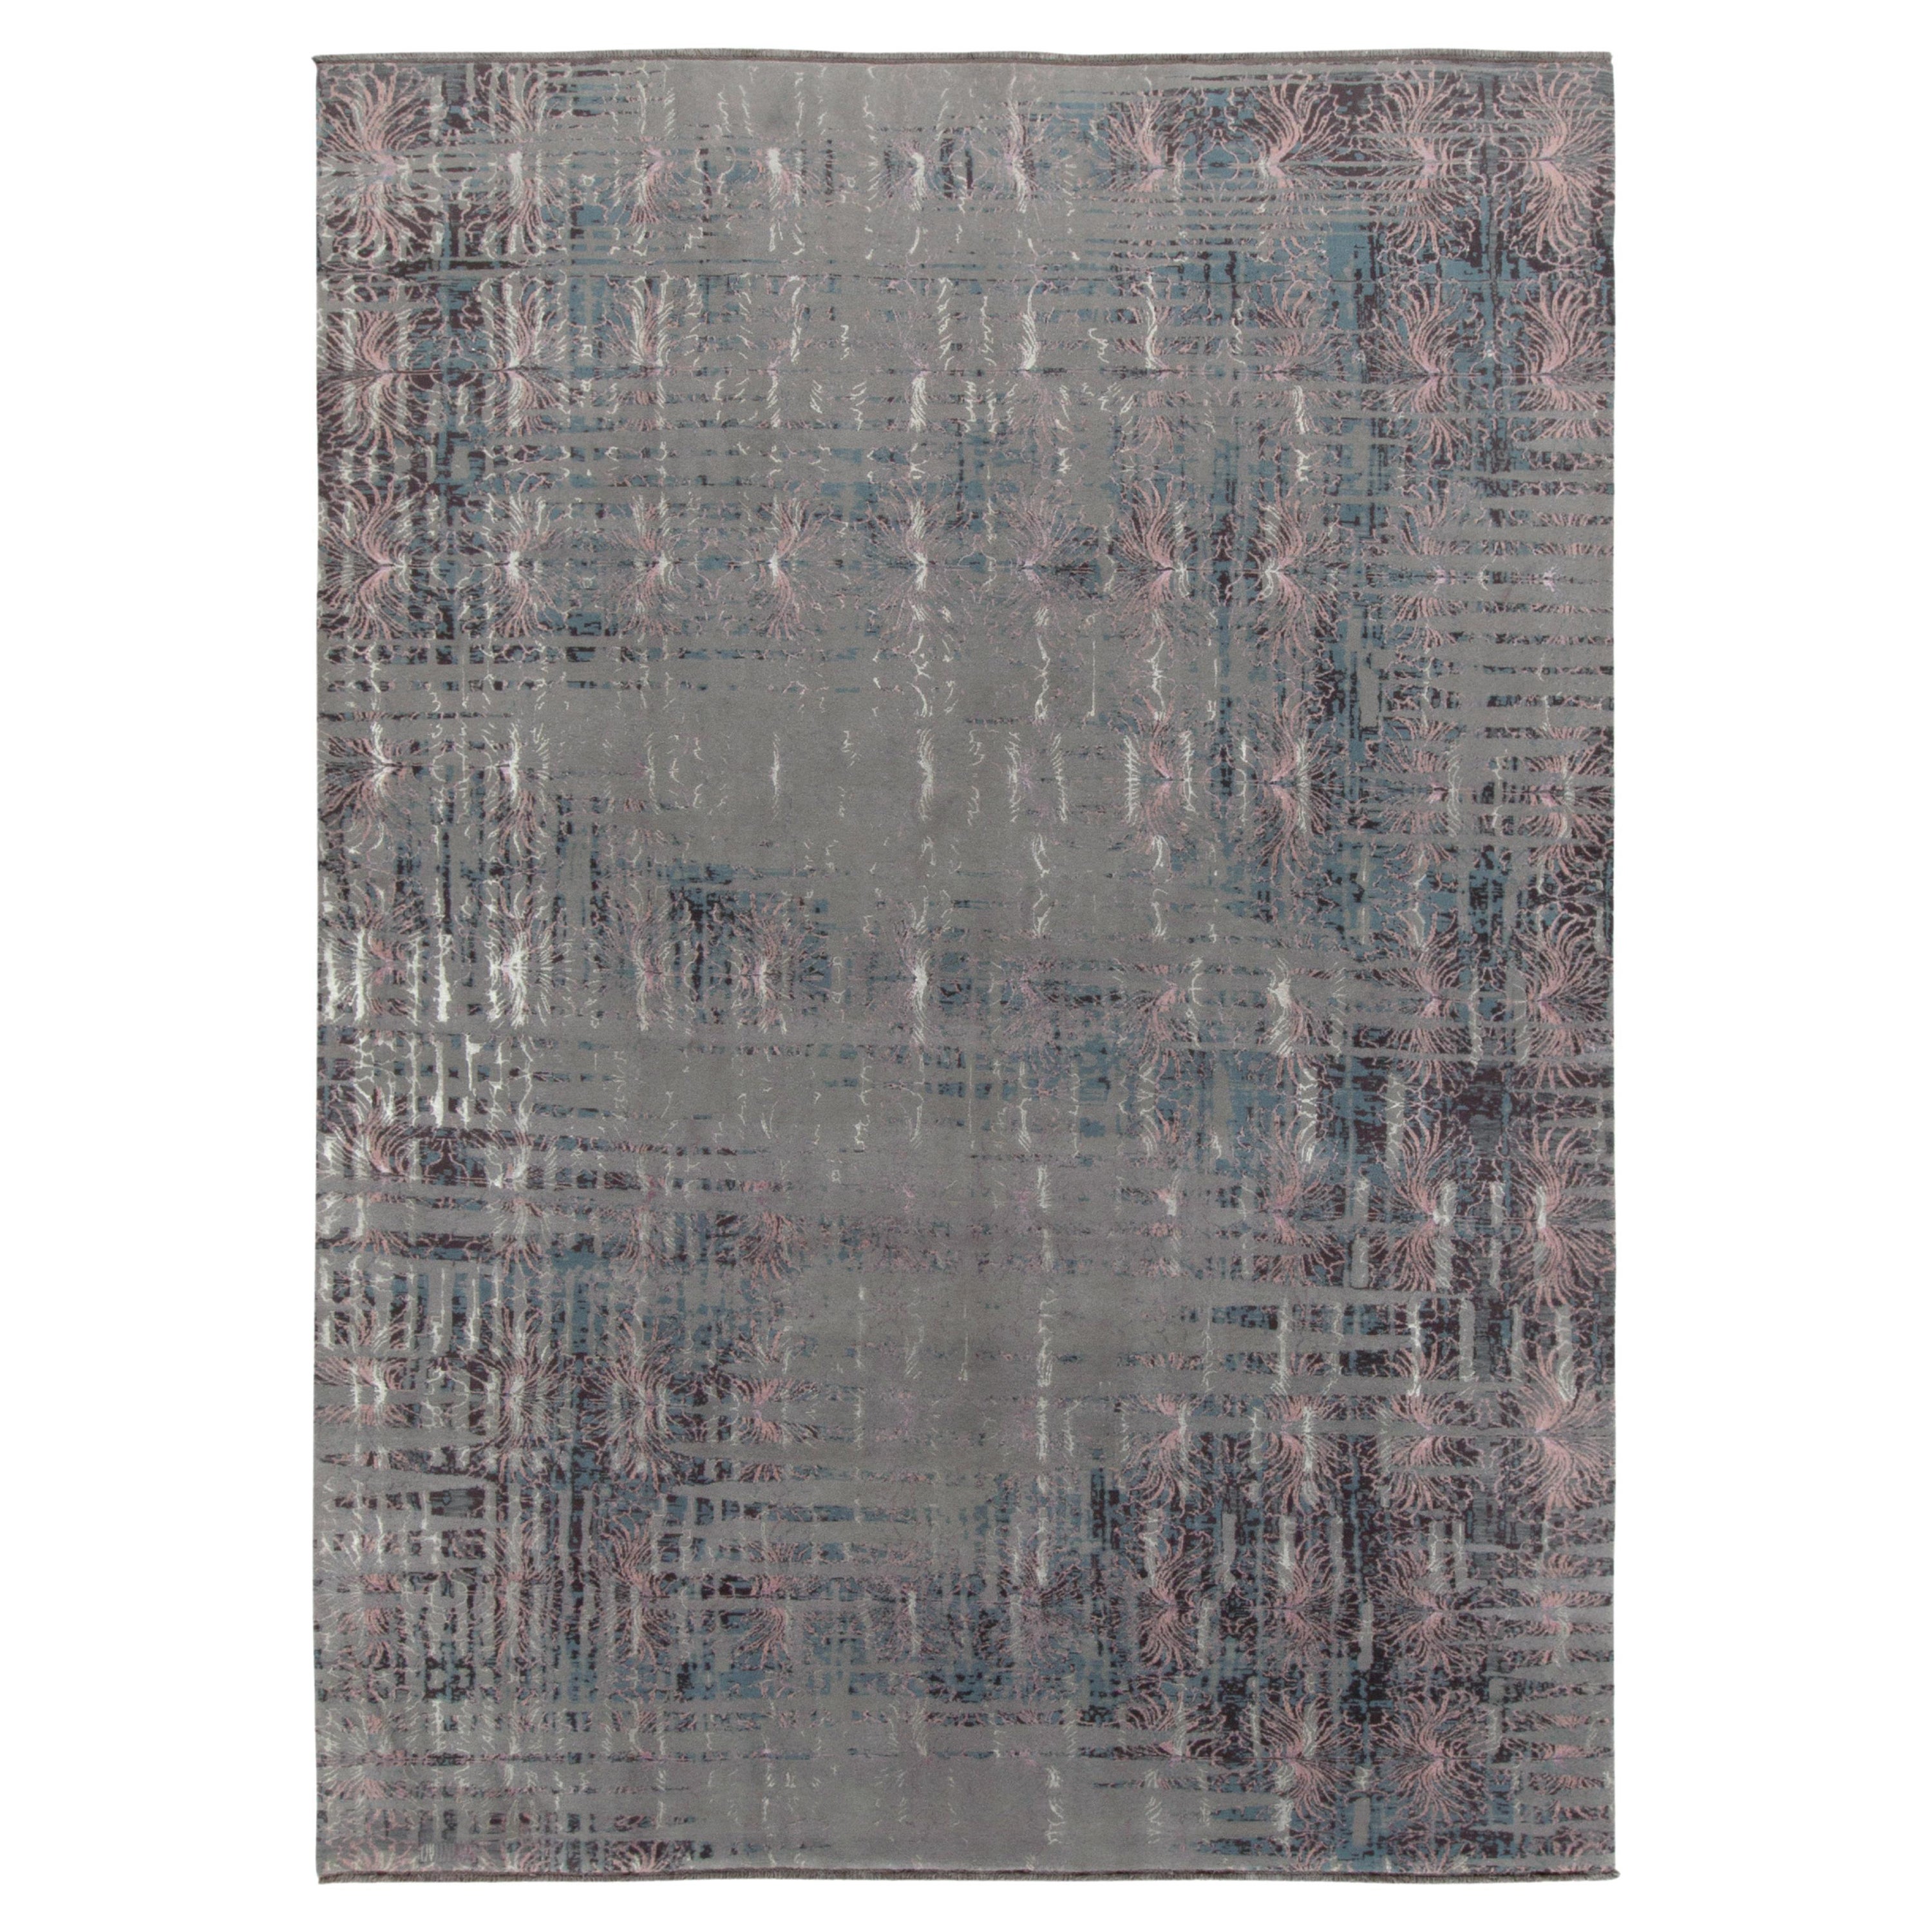 Rug & Kilim’s Abstract Rug in Blue and Grey, Subdued Pink Floral Patterns